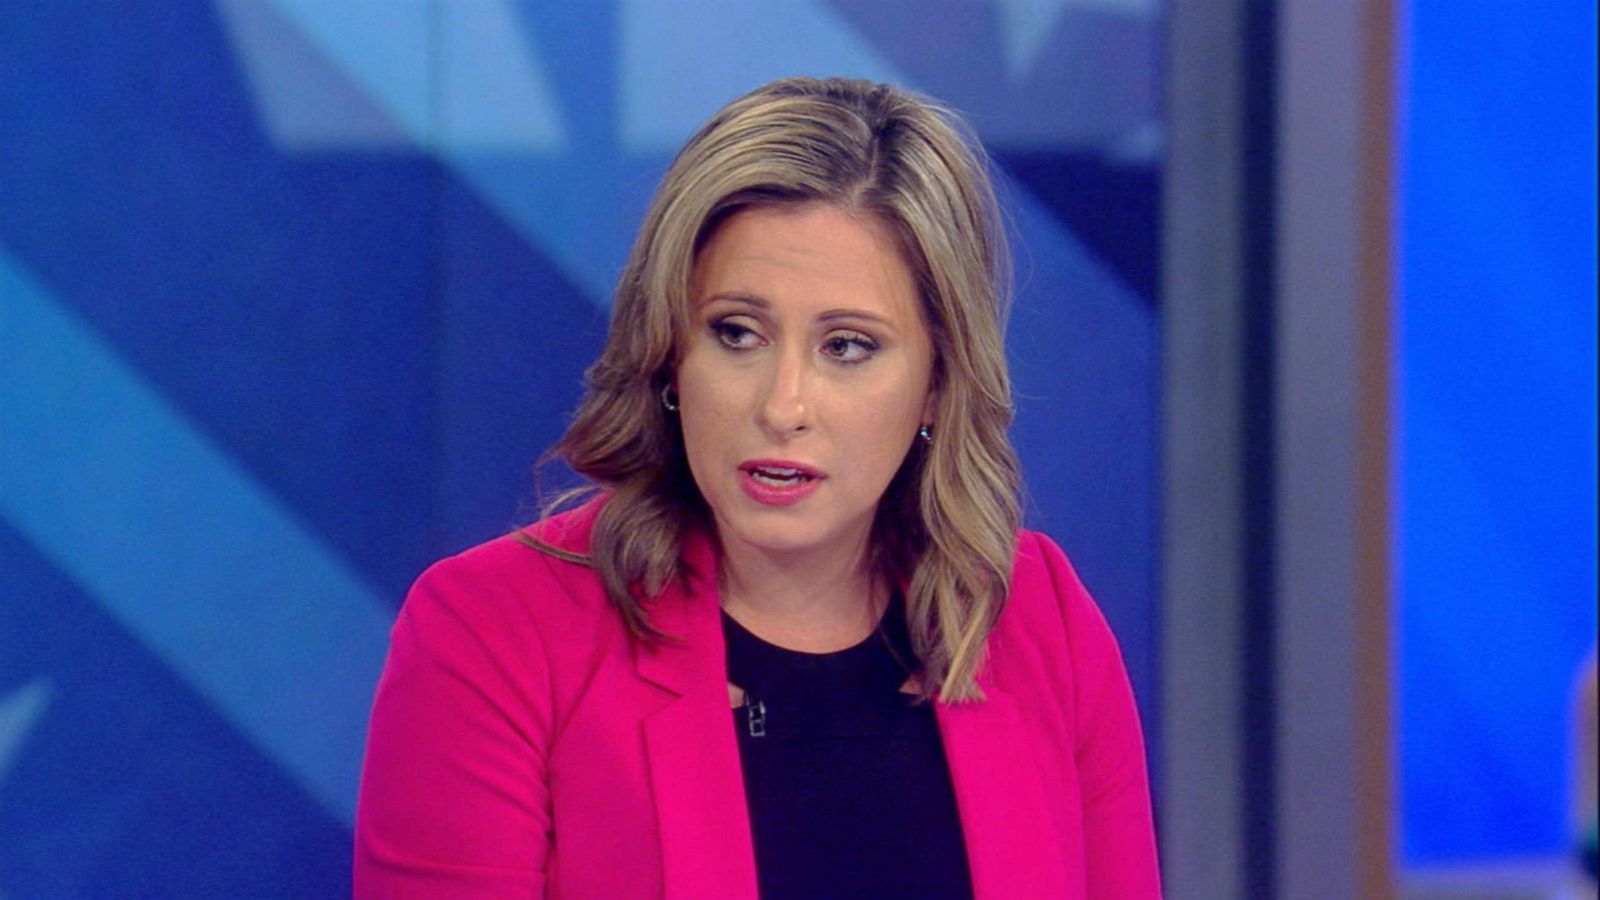 Katie Hill Reflecting On Her 2019 Scandal Former Rep Katie Hill Says She Still Hasn T Fully